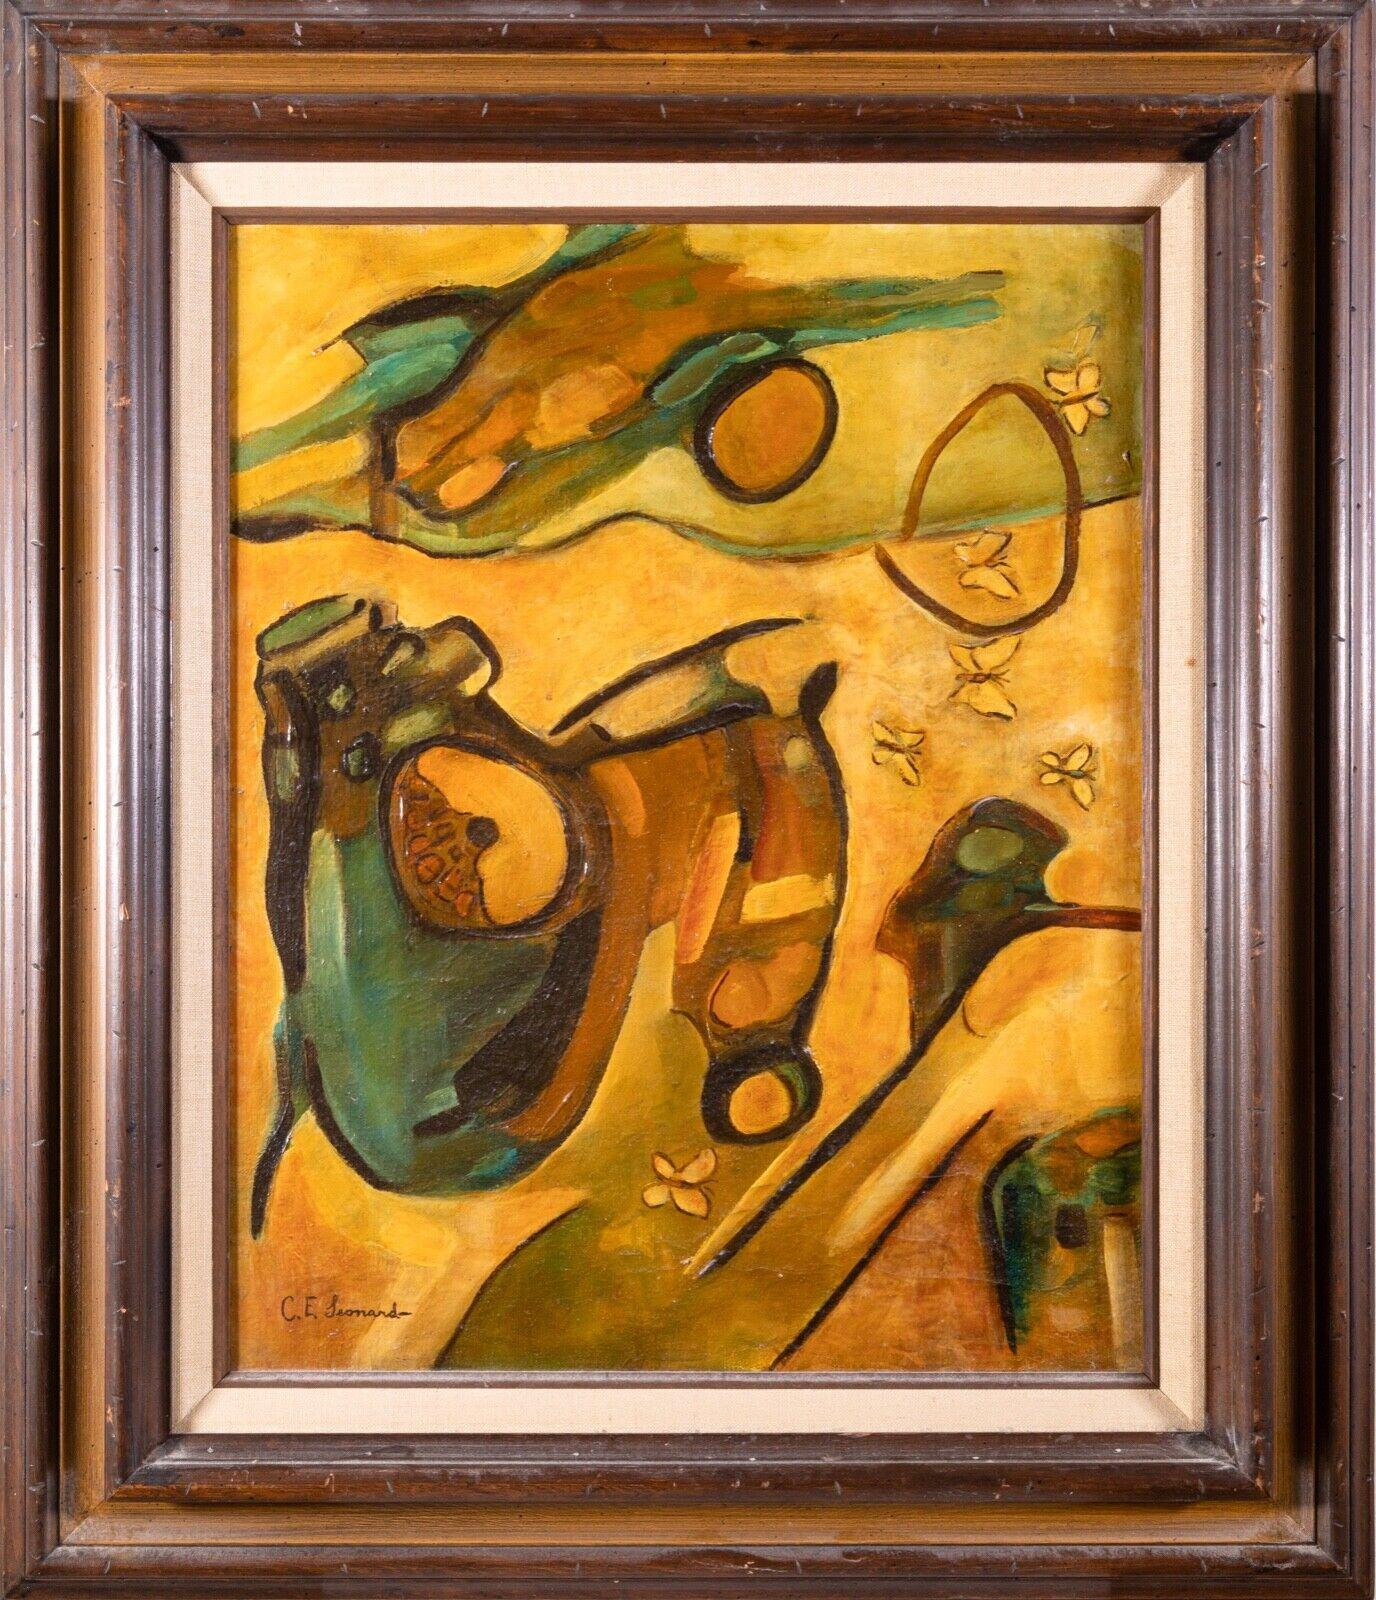 An expressive and intriguing oil painting on canvas signed C.E. Leonard. Hand signed bottom left as well as verso. Dated 1970. The cubist style composition depicts abstracted figures among butterflies in a warm ochre color palette. A surreal